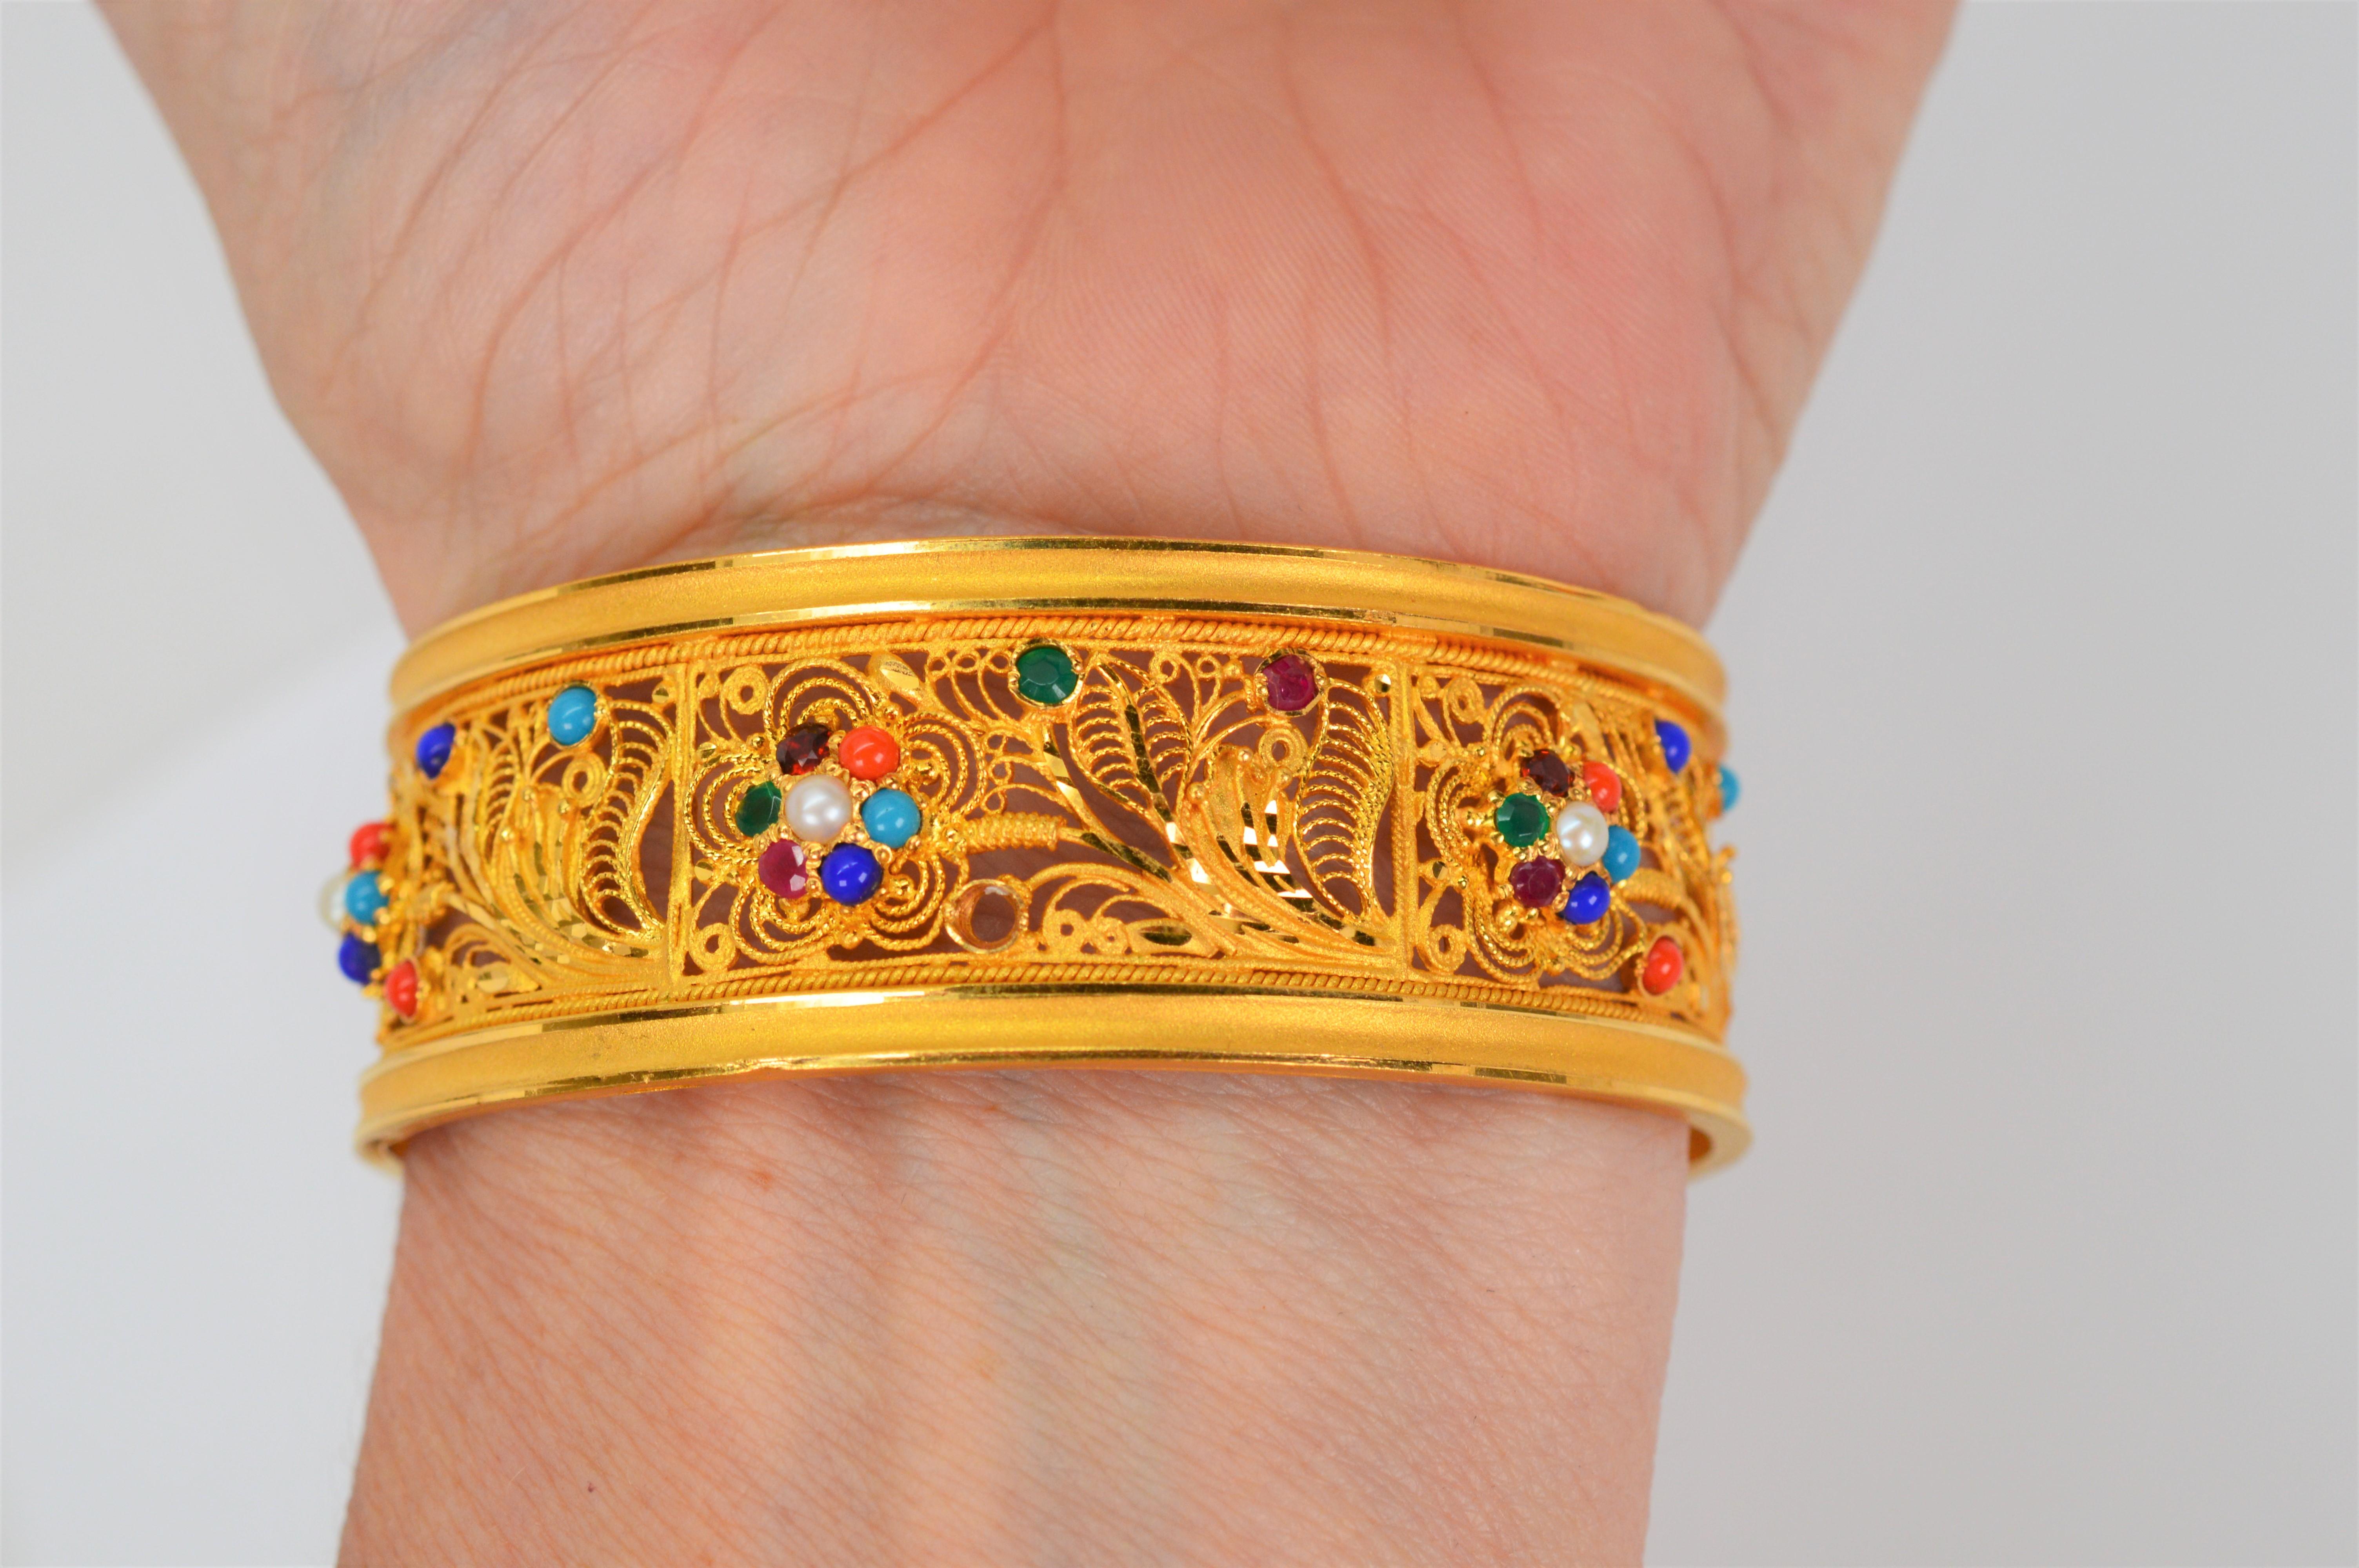 22 Karat Yellow Gold Filigree Gemstone Bangle Bracelet In Excellent Condition For Sale In Mount Kisco, NY